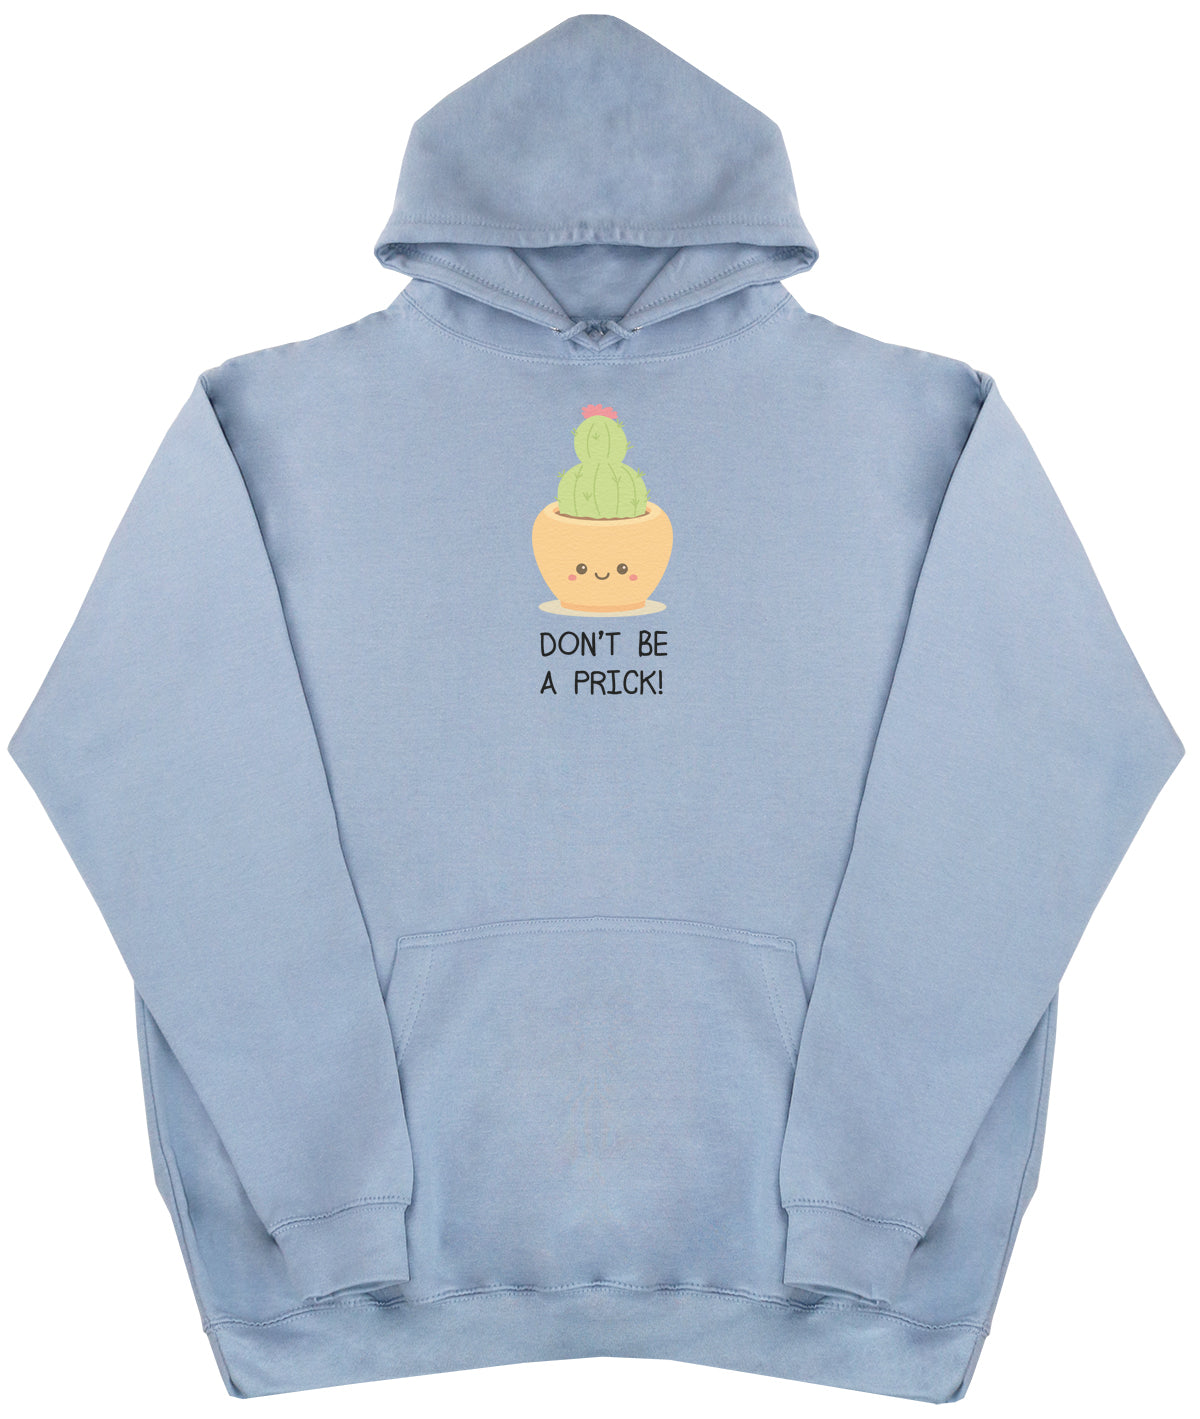 Don't Be A Prick - Huge Oversized Comfy Original Hoody